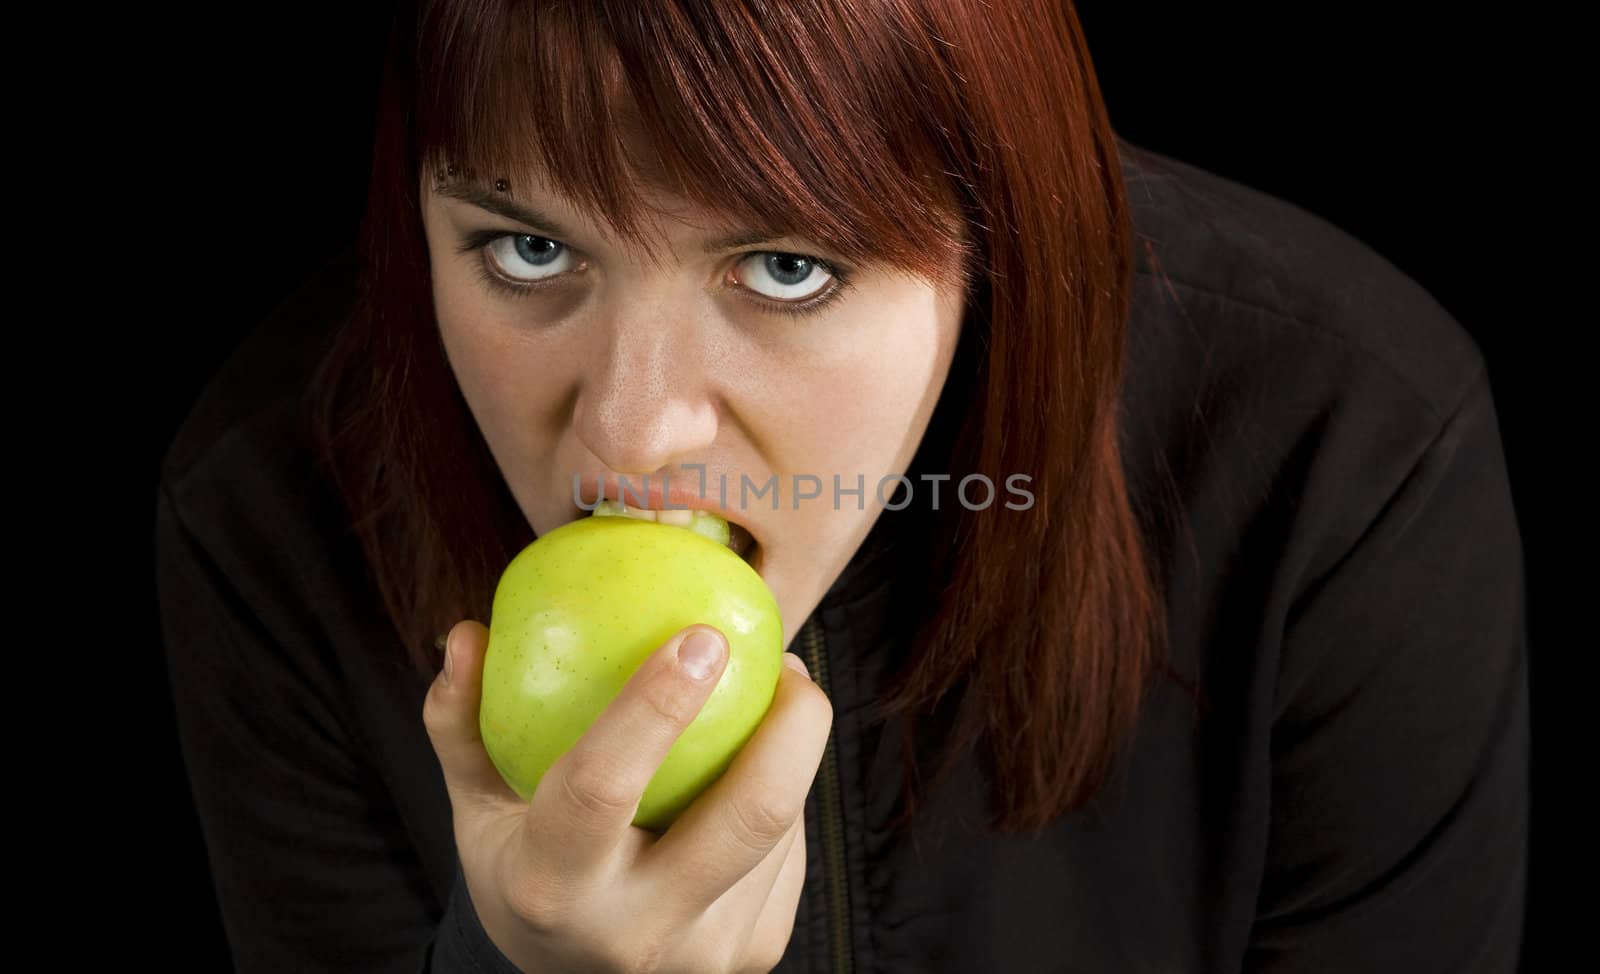 Redhead girl biting on a delicious green apple with a flirtatious look.

Shot in studio.